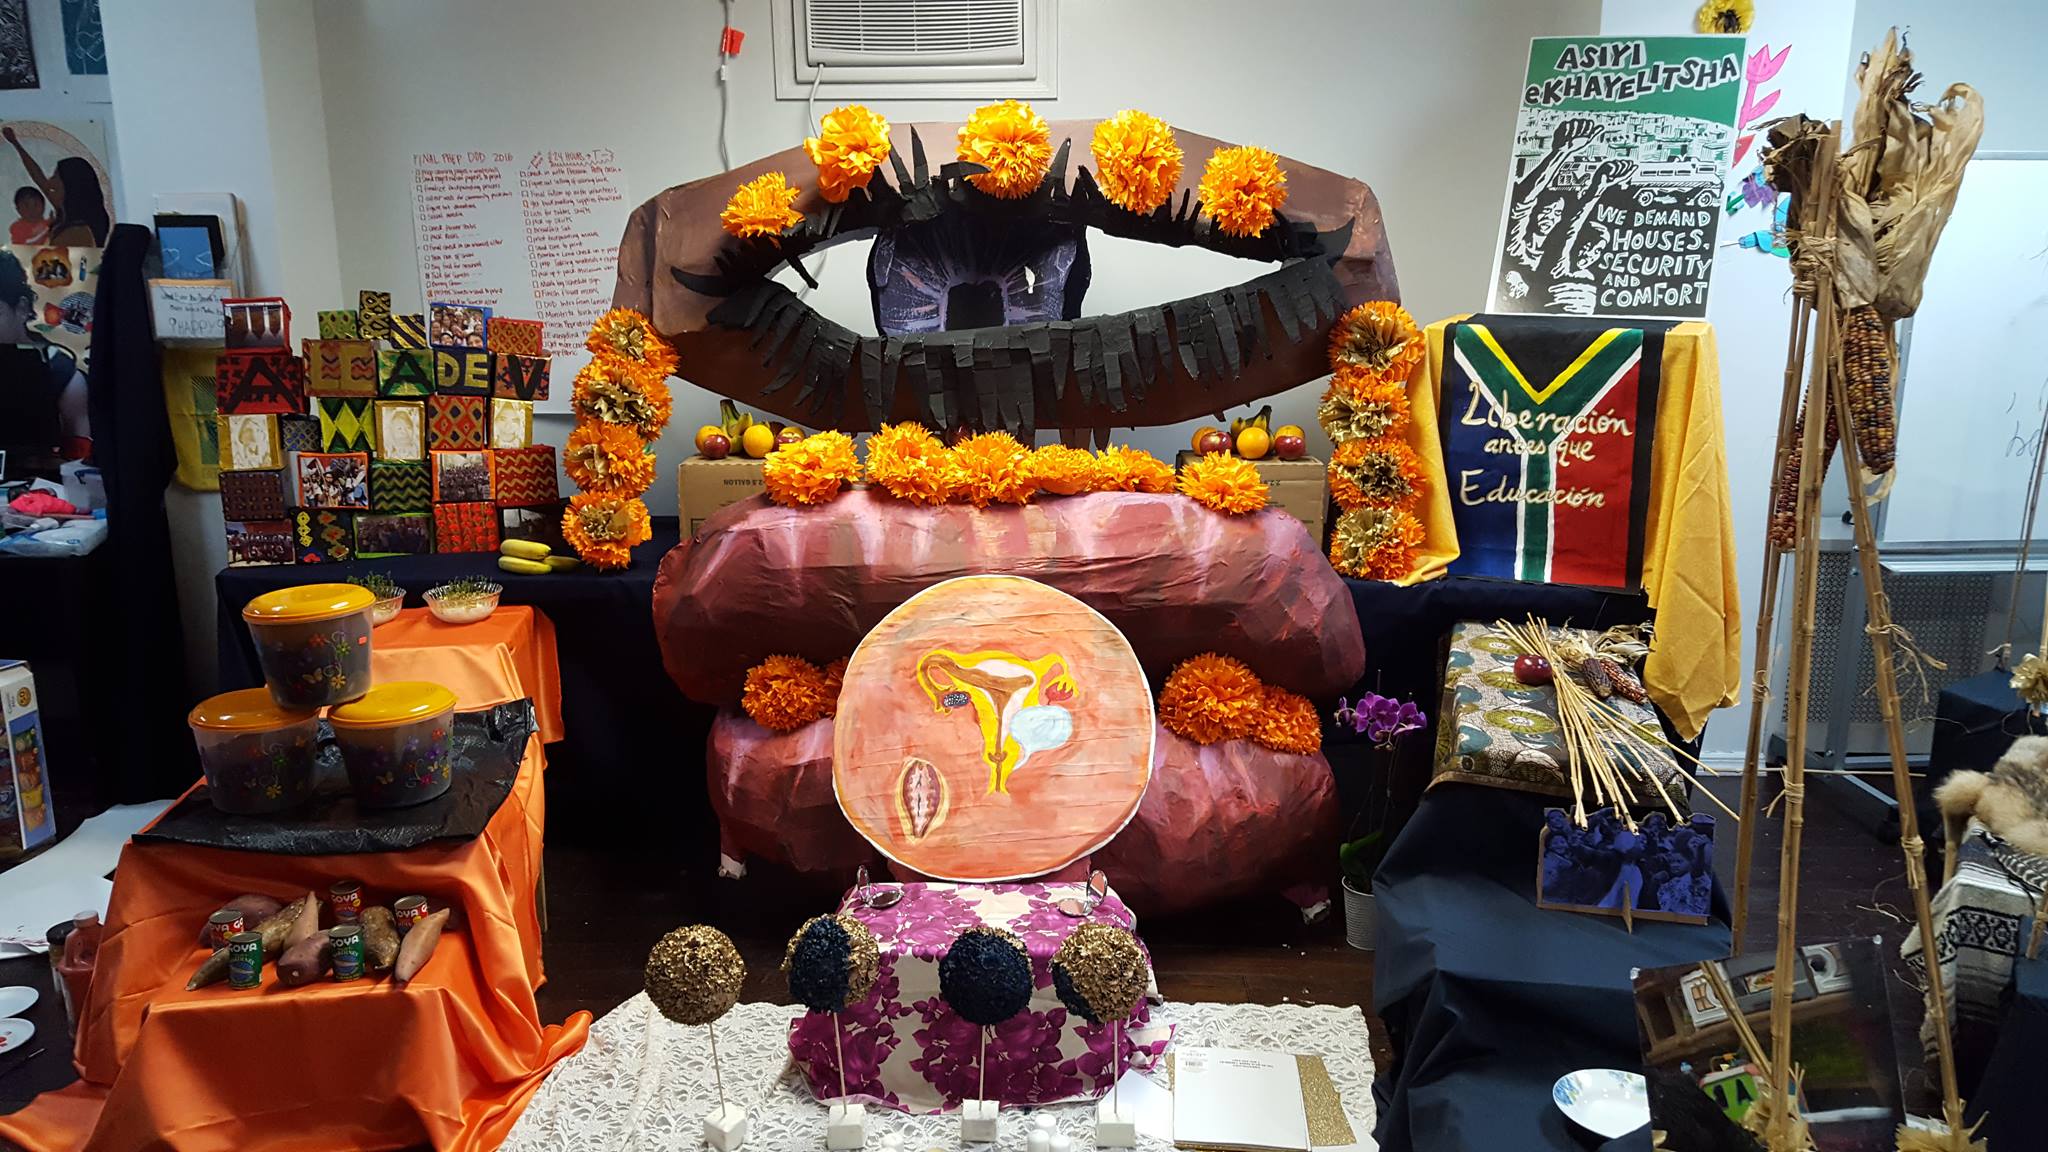 An altar space with a large papier-mâché eyeball, pair of lips, and circle with an illustration of a uterus. The papier-mâché sculptures are adorned with orange flowers. On each side of the sculpture are staircased stands, covered with orange and navy blue fabric. On each stand are food offerings like corn, Goya cans, tupperware, and fruit. Also included is a flag that reads “liberación antes que educación